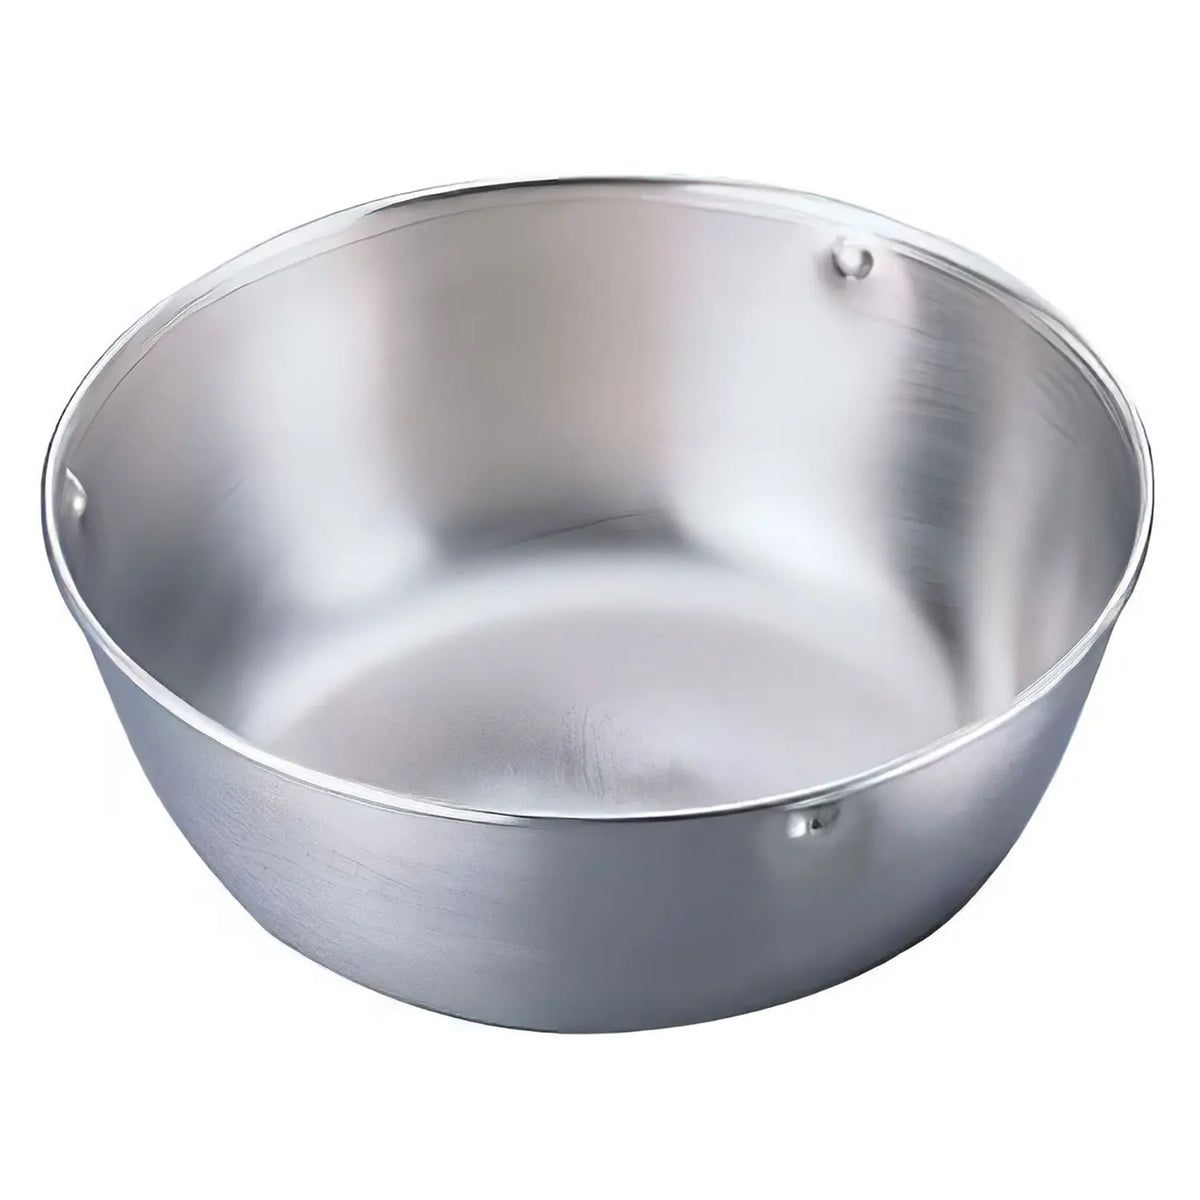 IKD ecoclean Stainless Steel Lunch Bowl